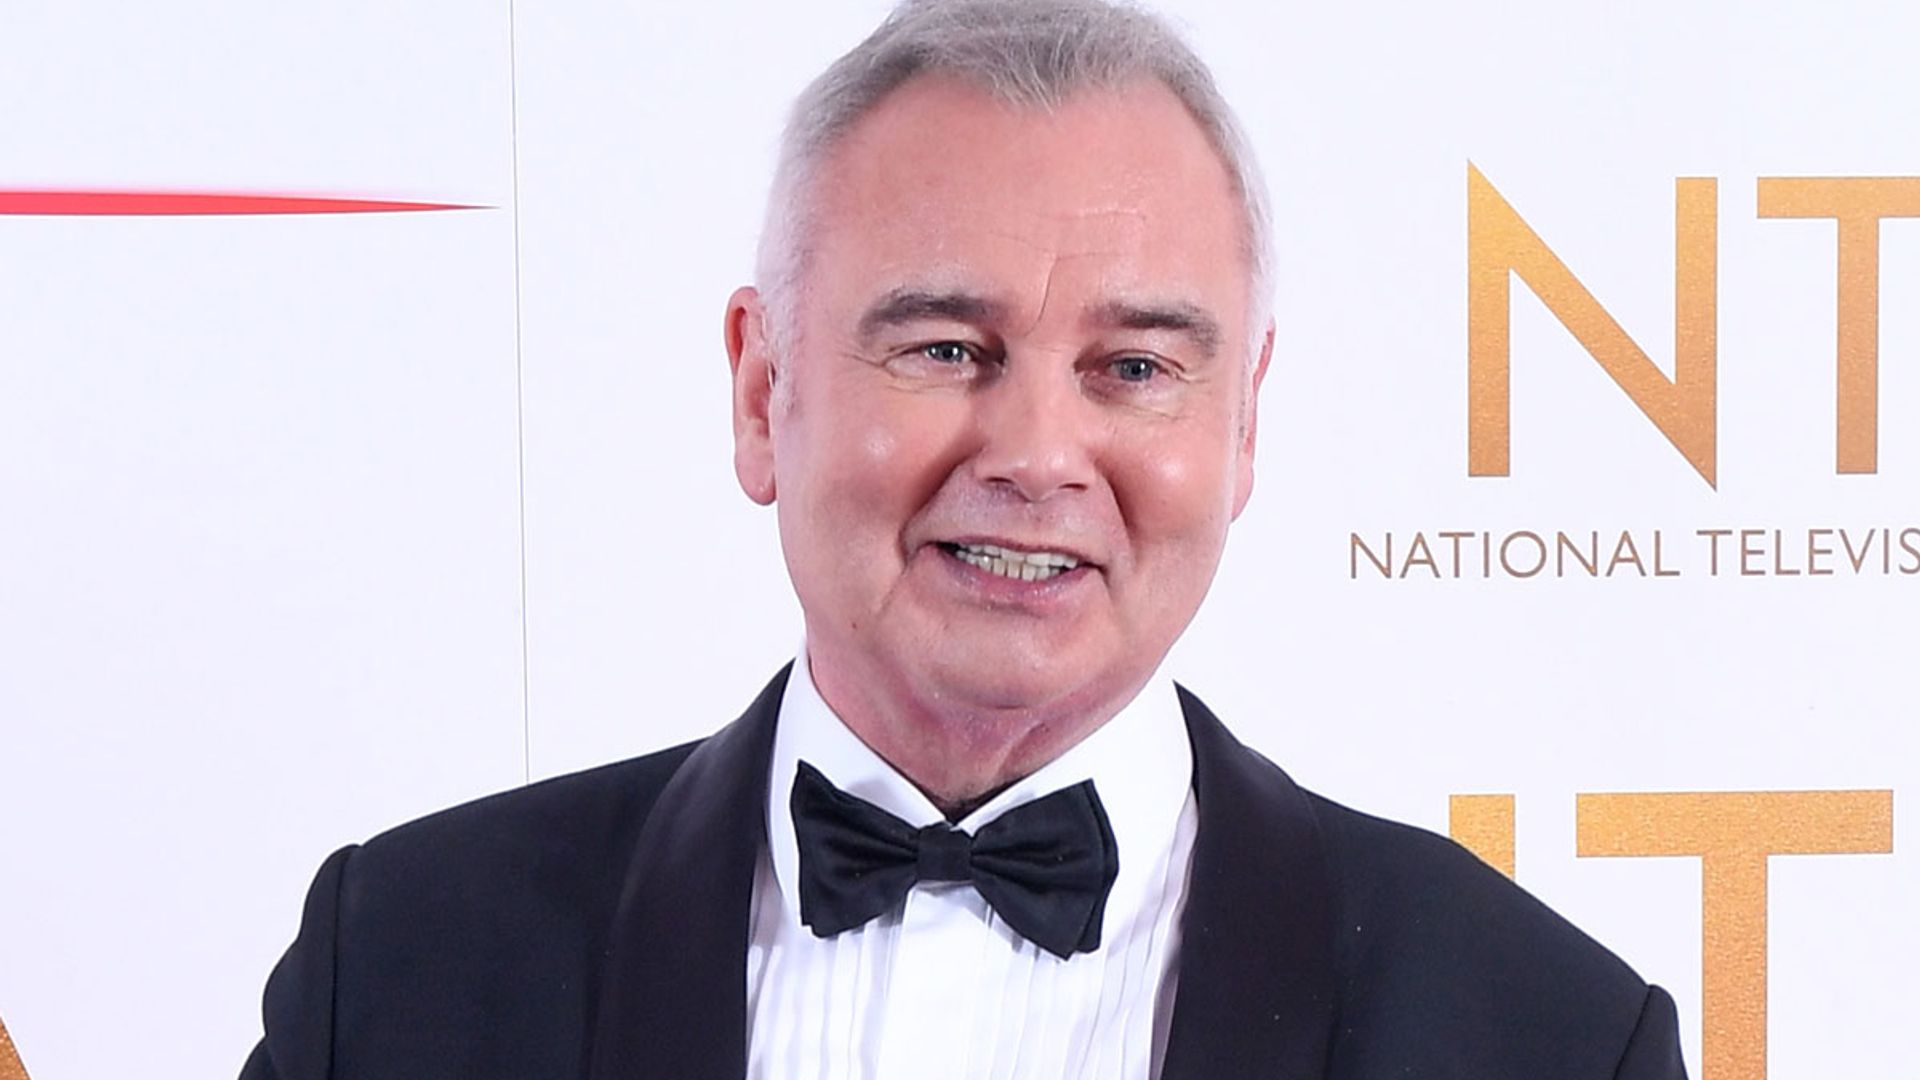 Eamonn Holmes delights fans with adorable photo of granddaughter